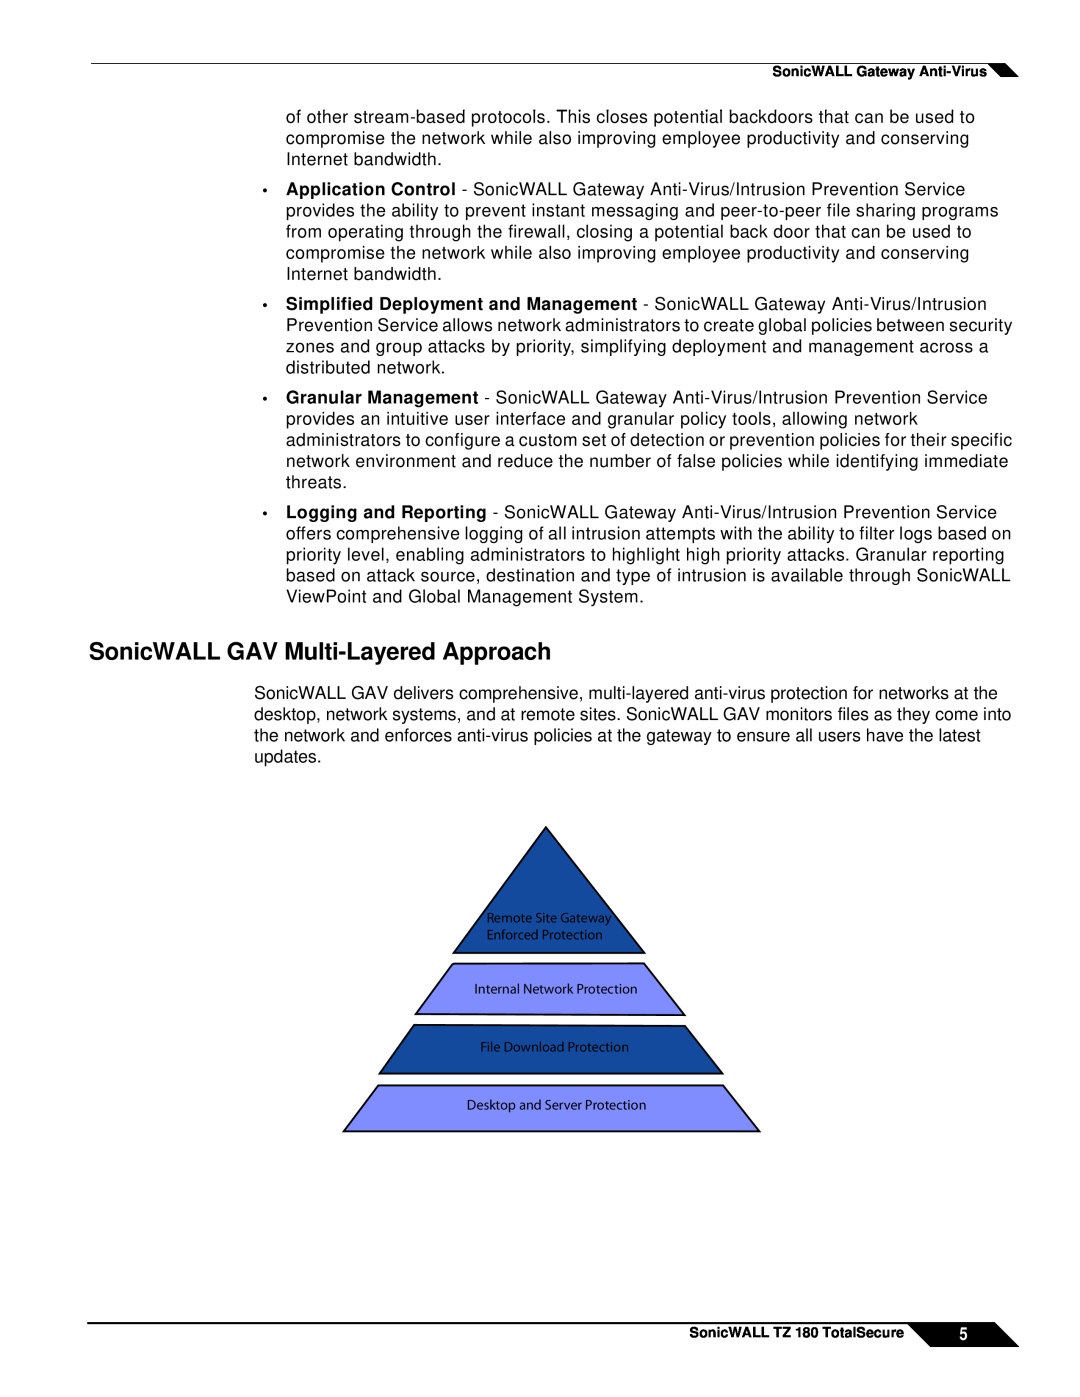 SonicWALL TZ 180 manual SonicWALL GAV Multi-LayeredApproach, NTERNAL .ETWORK 0ROTECTION, ILEL$OWNLOAD 0ROTECTION 